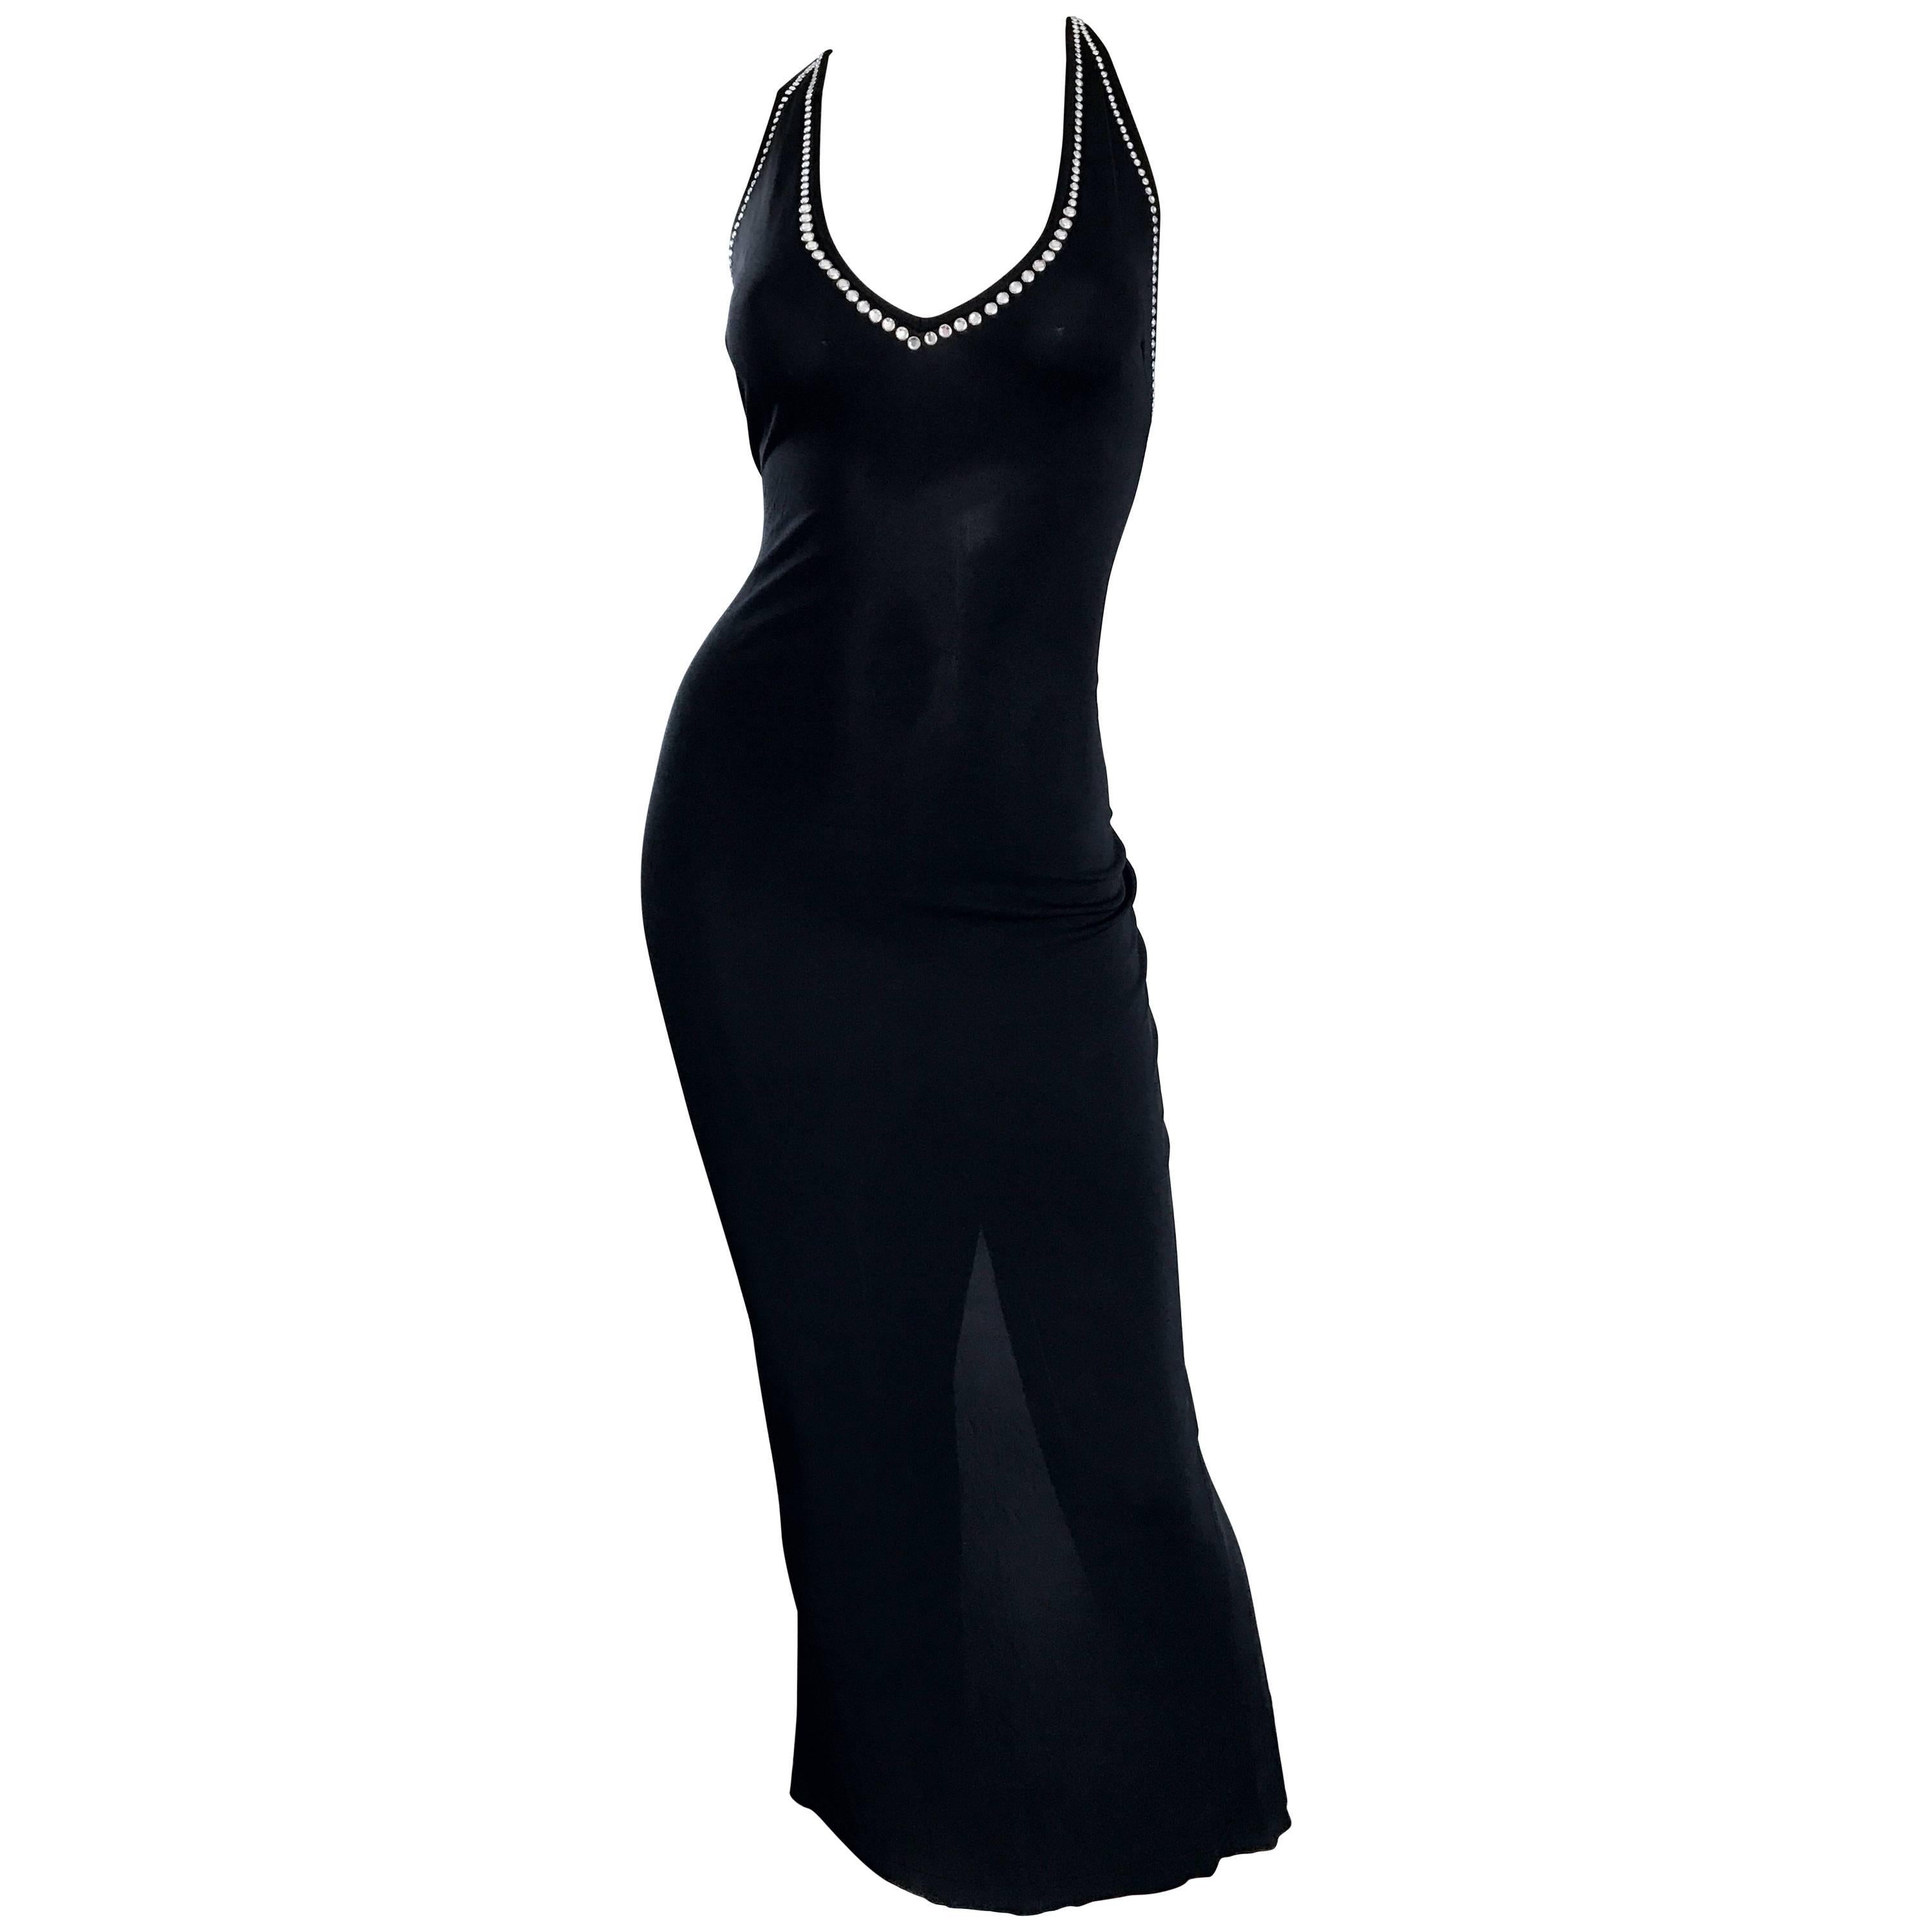 1990s Blumarine Anna Molinari Sexy Black Crstyal Studded Vintage Jersey Gown 90s For Sale